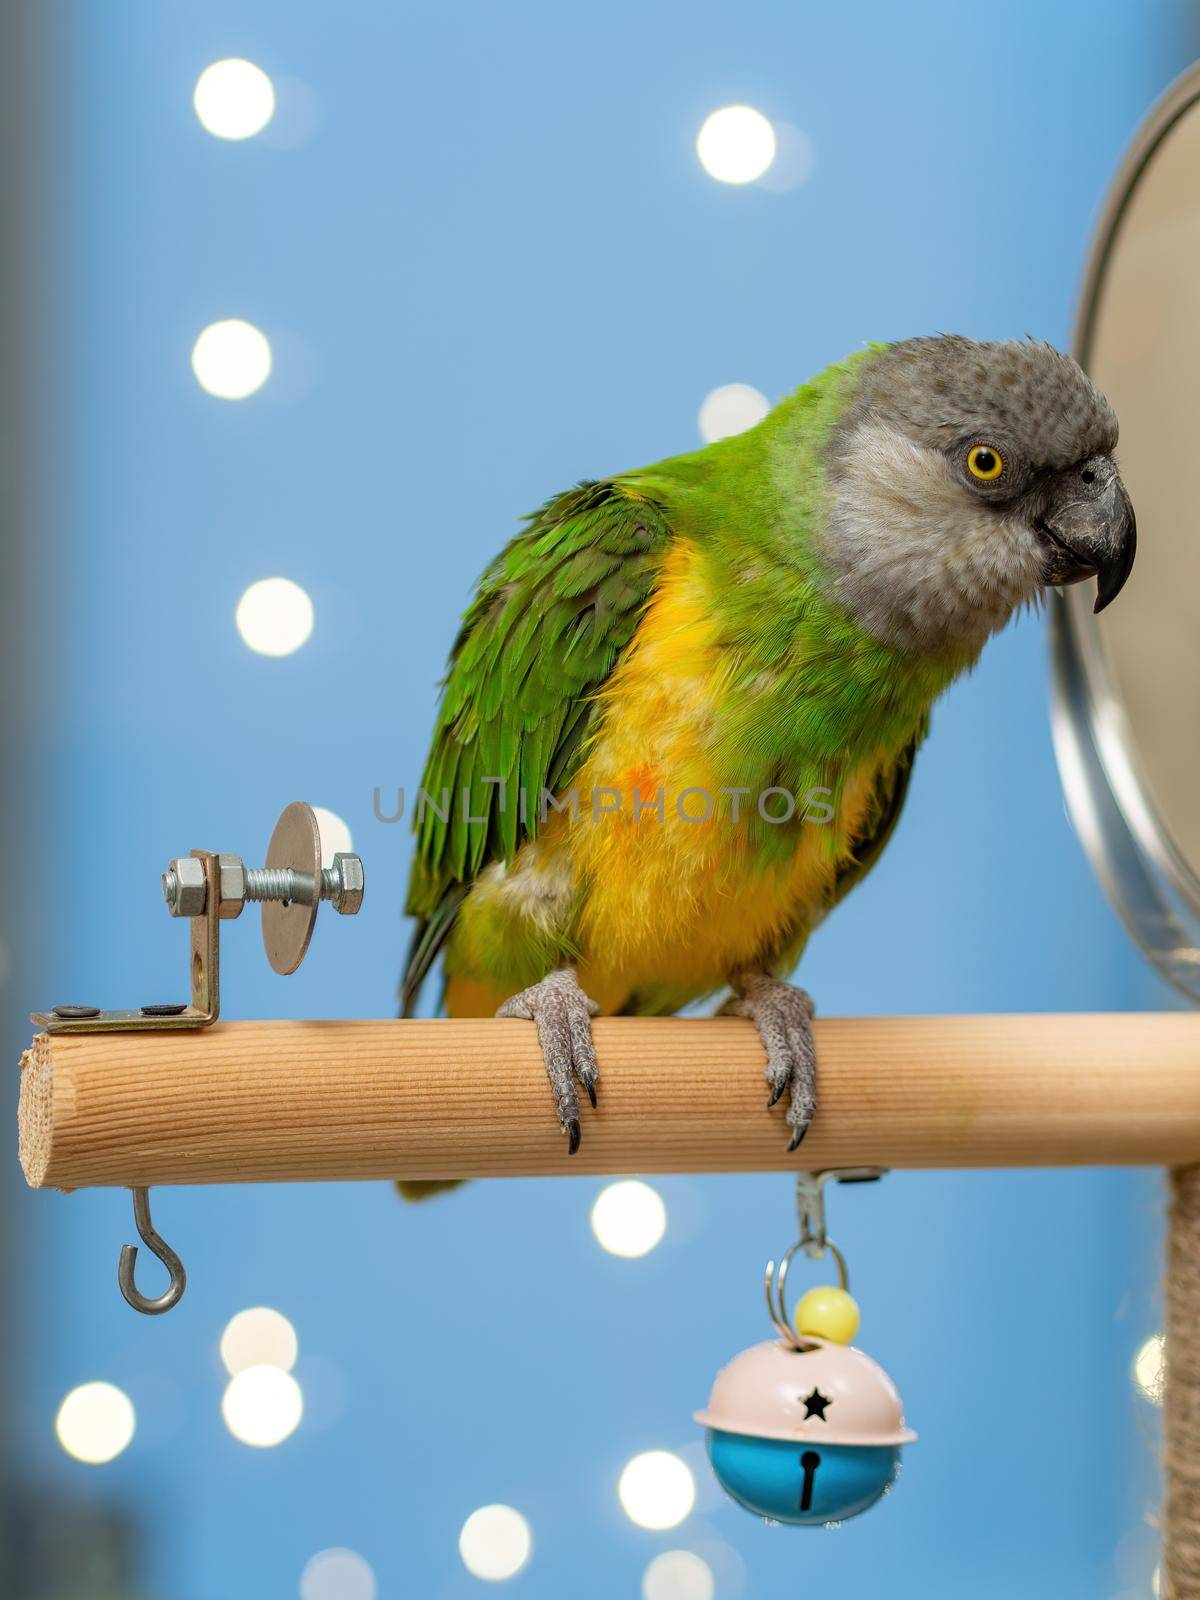 Poicephalus senegalus. Cute Senegal parrot on a perch on a blue background by Andre1ns